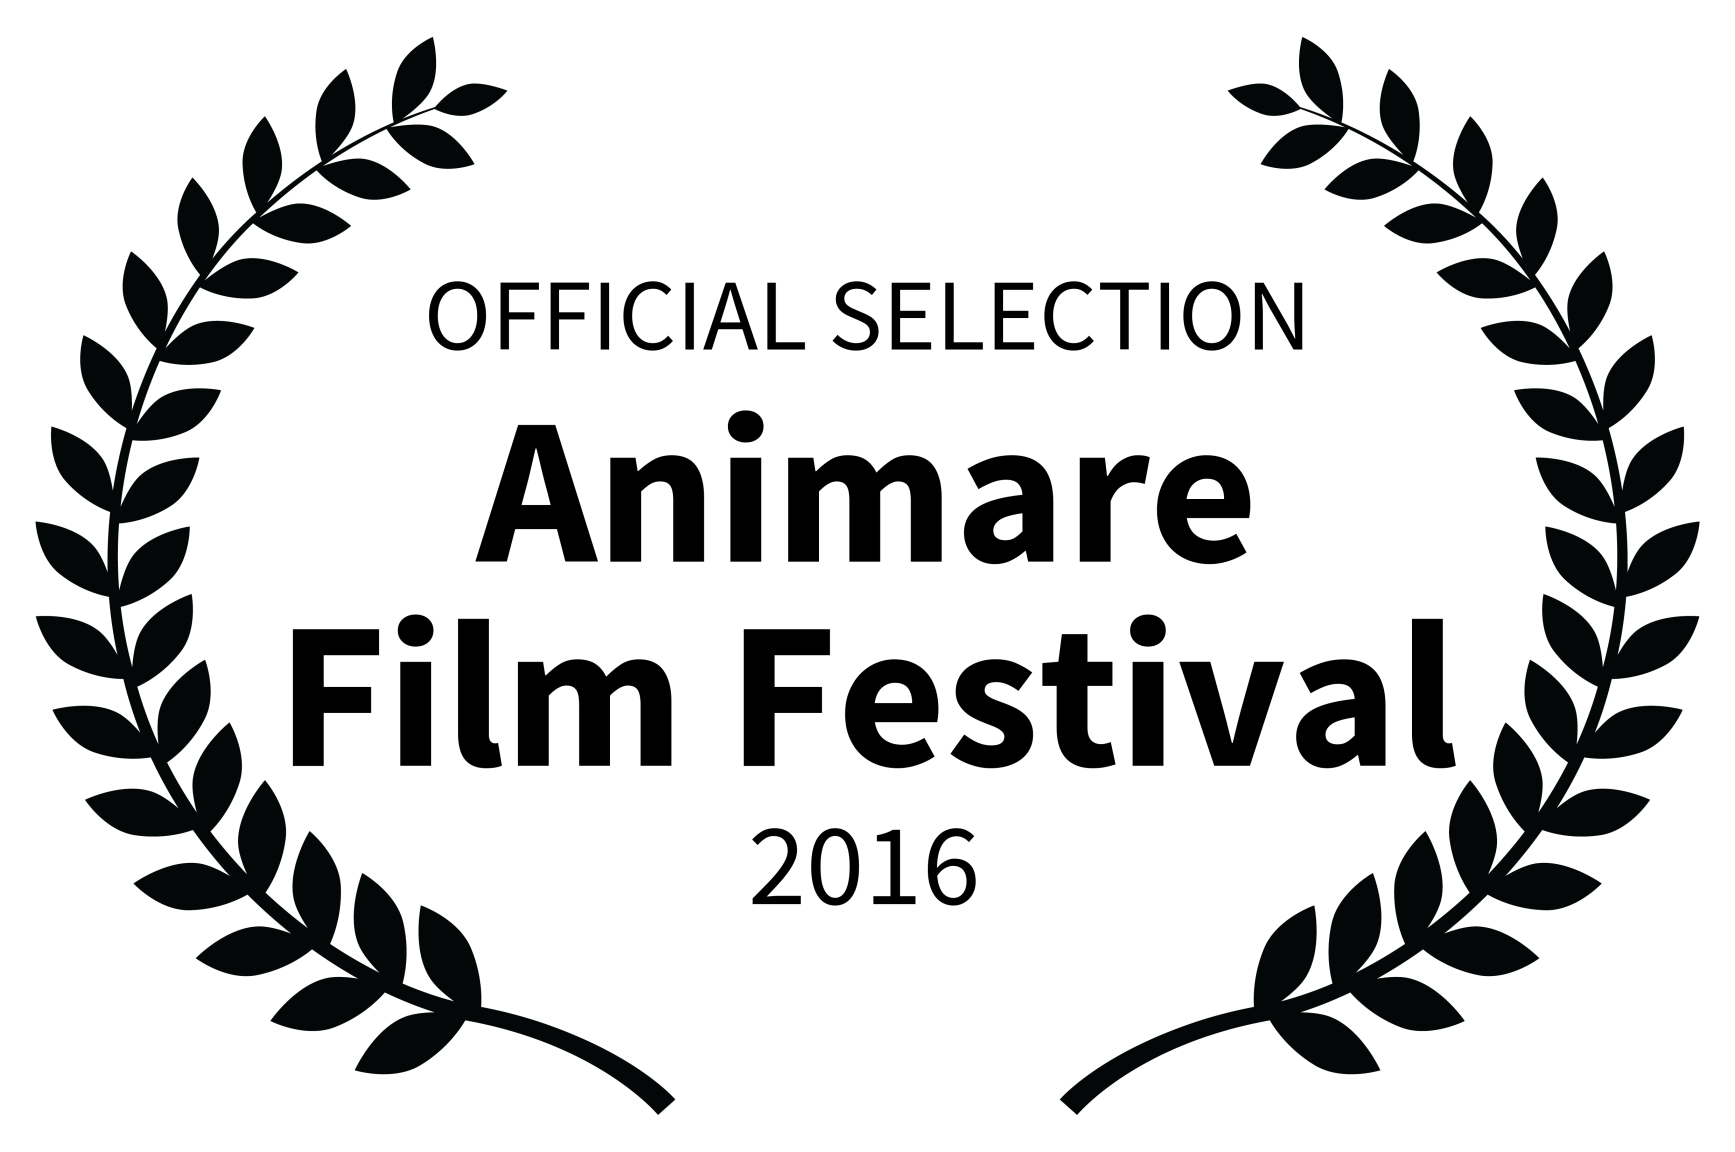 Official selection: Animare Film Festival 2015